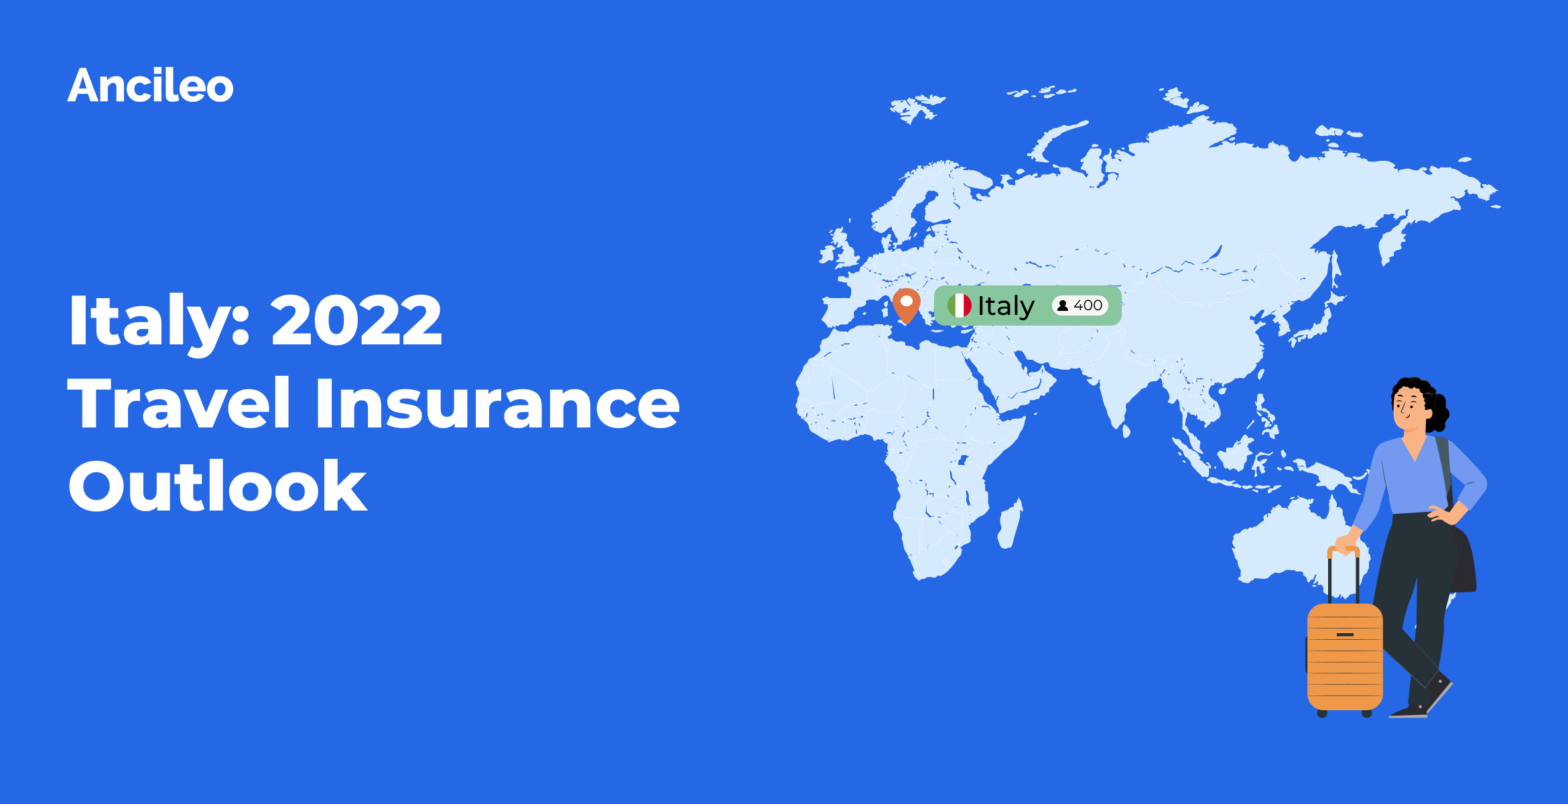 Italy: 2022 Travel Insurance Outlook